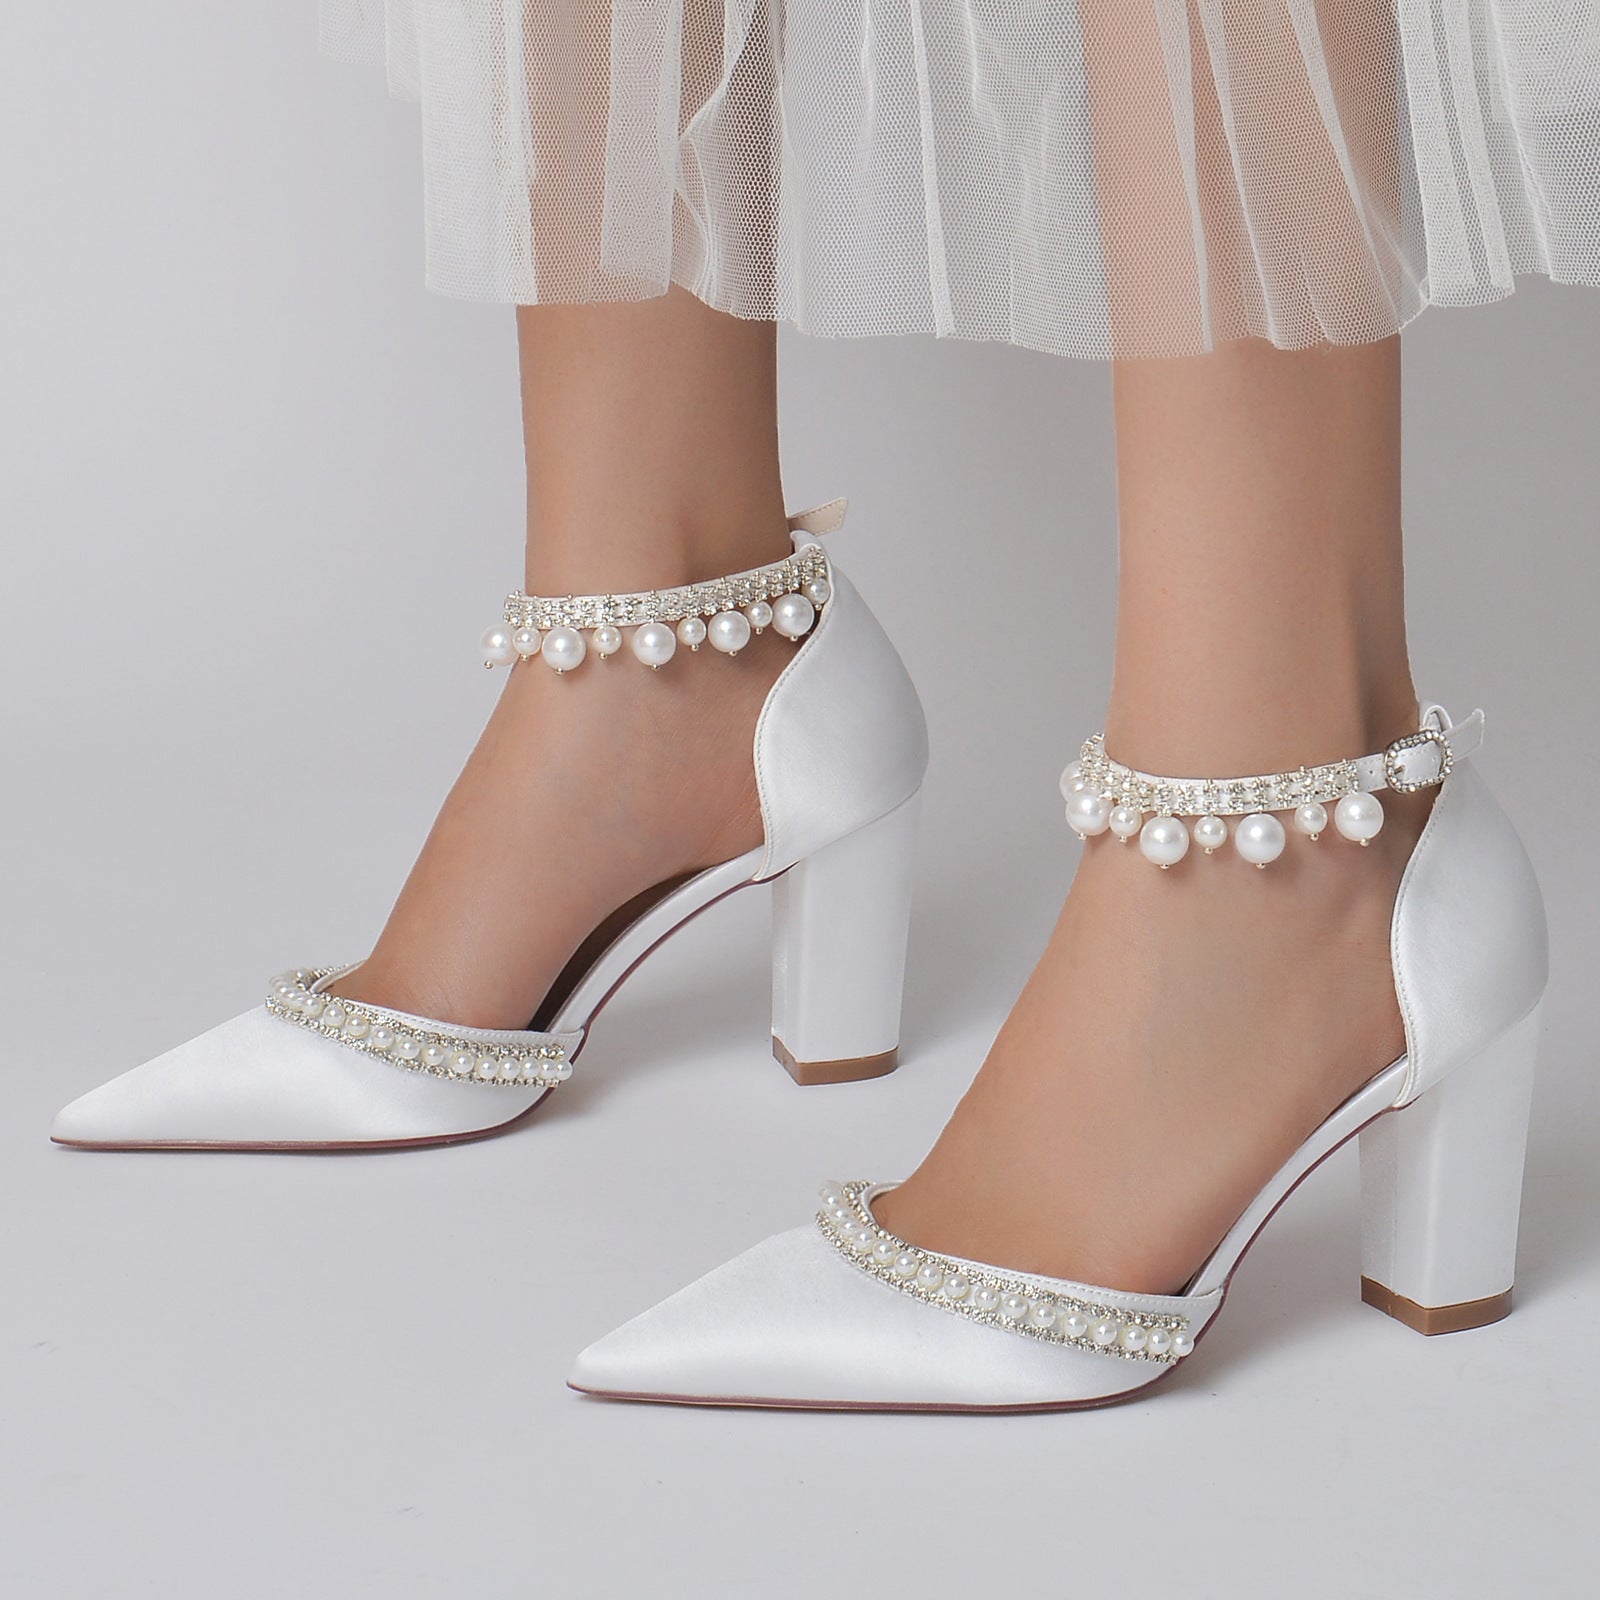 Satin Chunky heels d'Orsay bridal pumps pointed closed toe ankle pearls strap heels